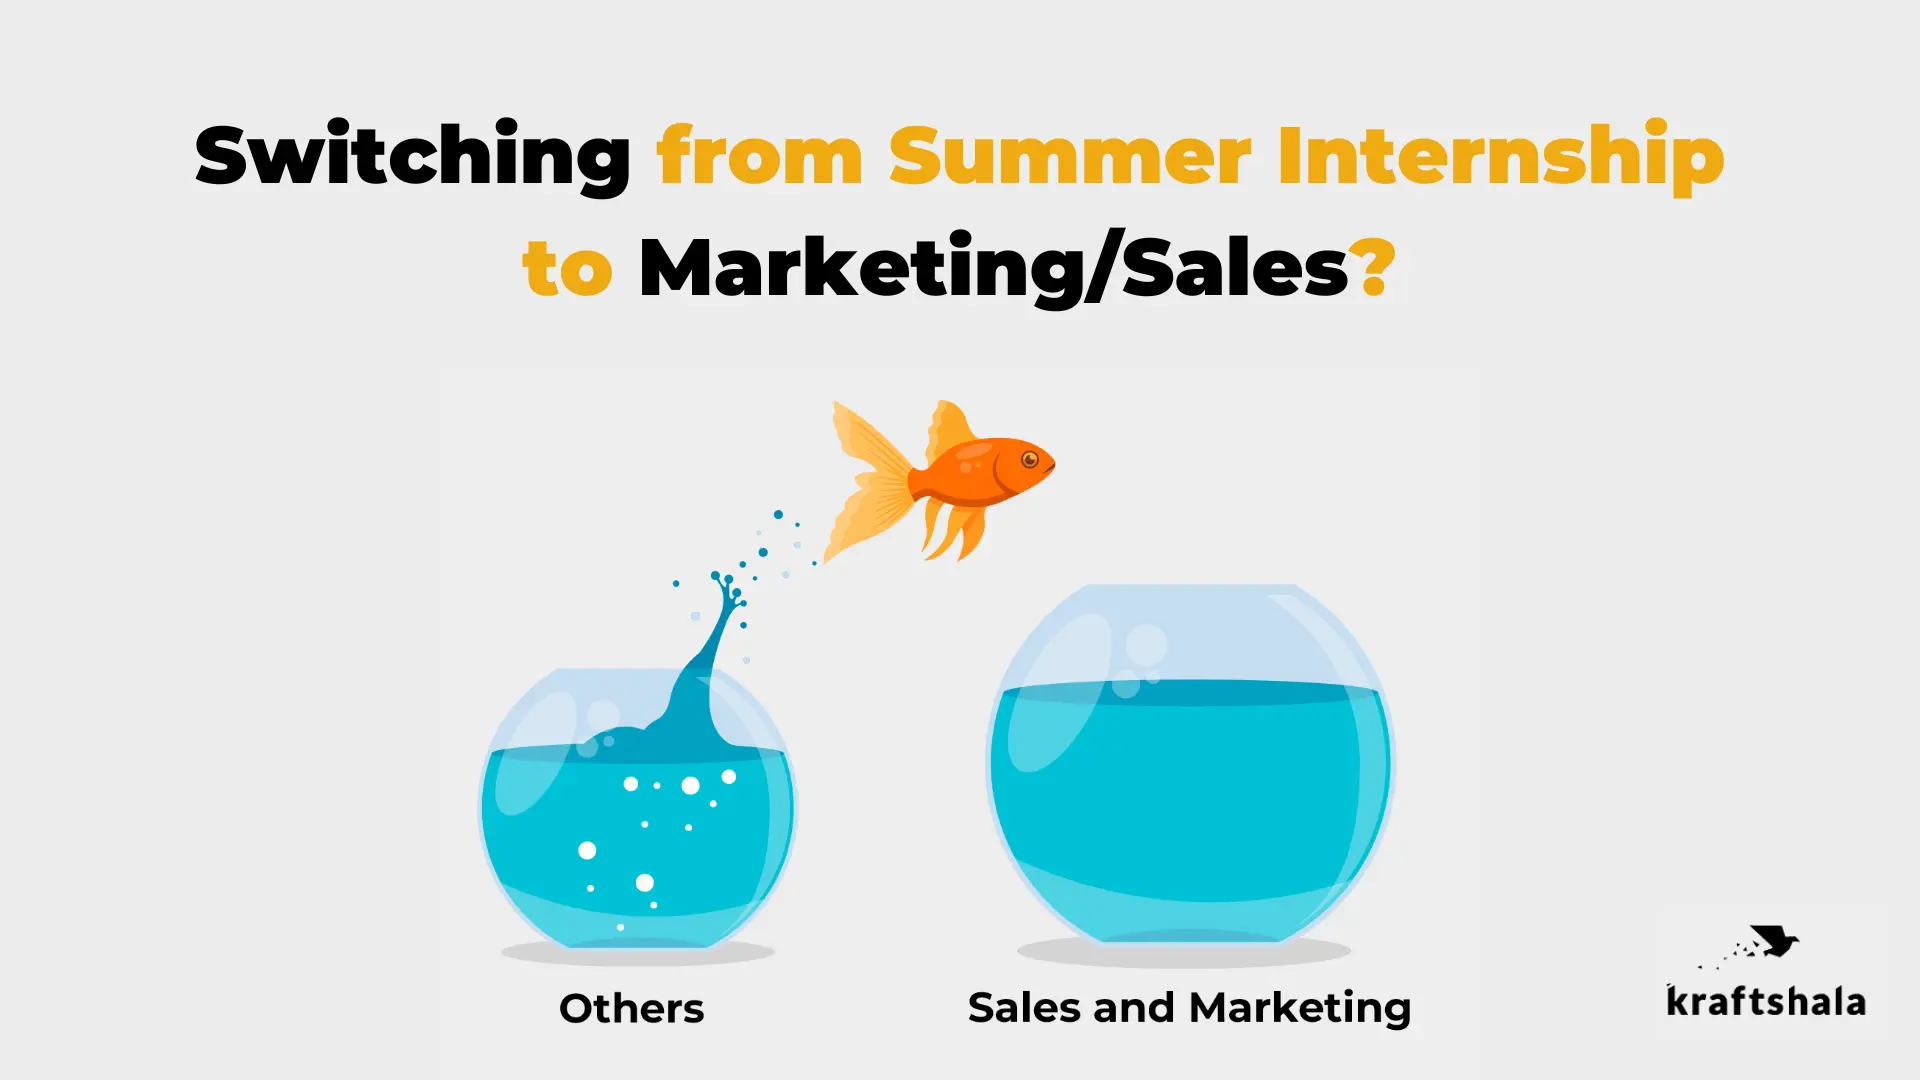 How to Switch to Sales and Marketing After Your Summer Internship?